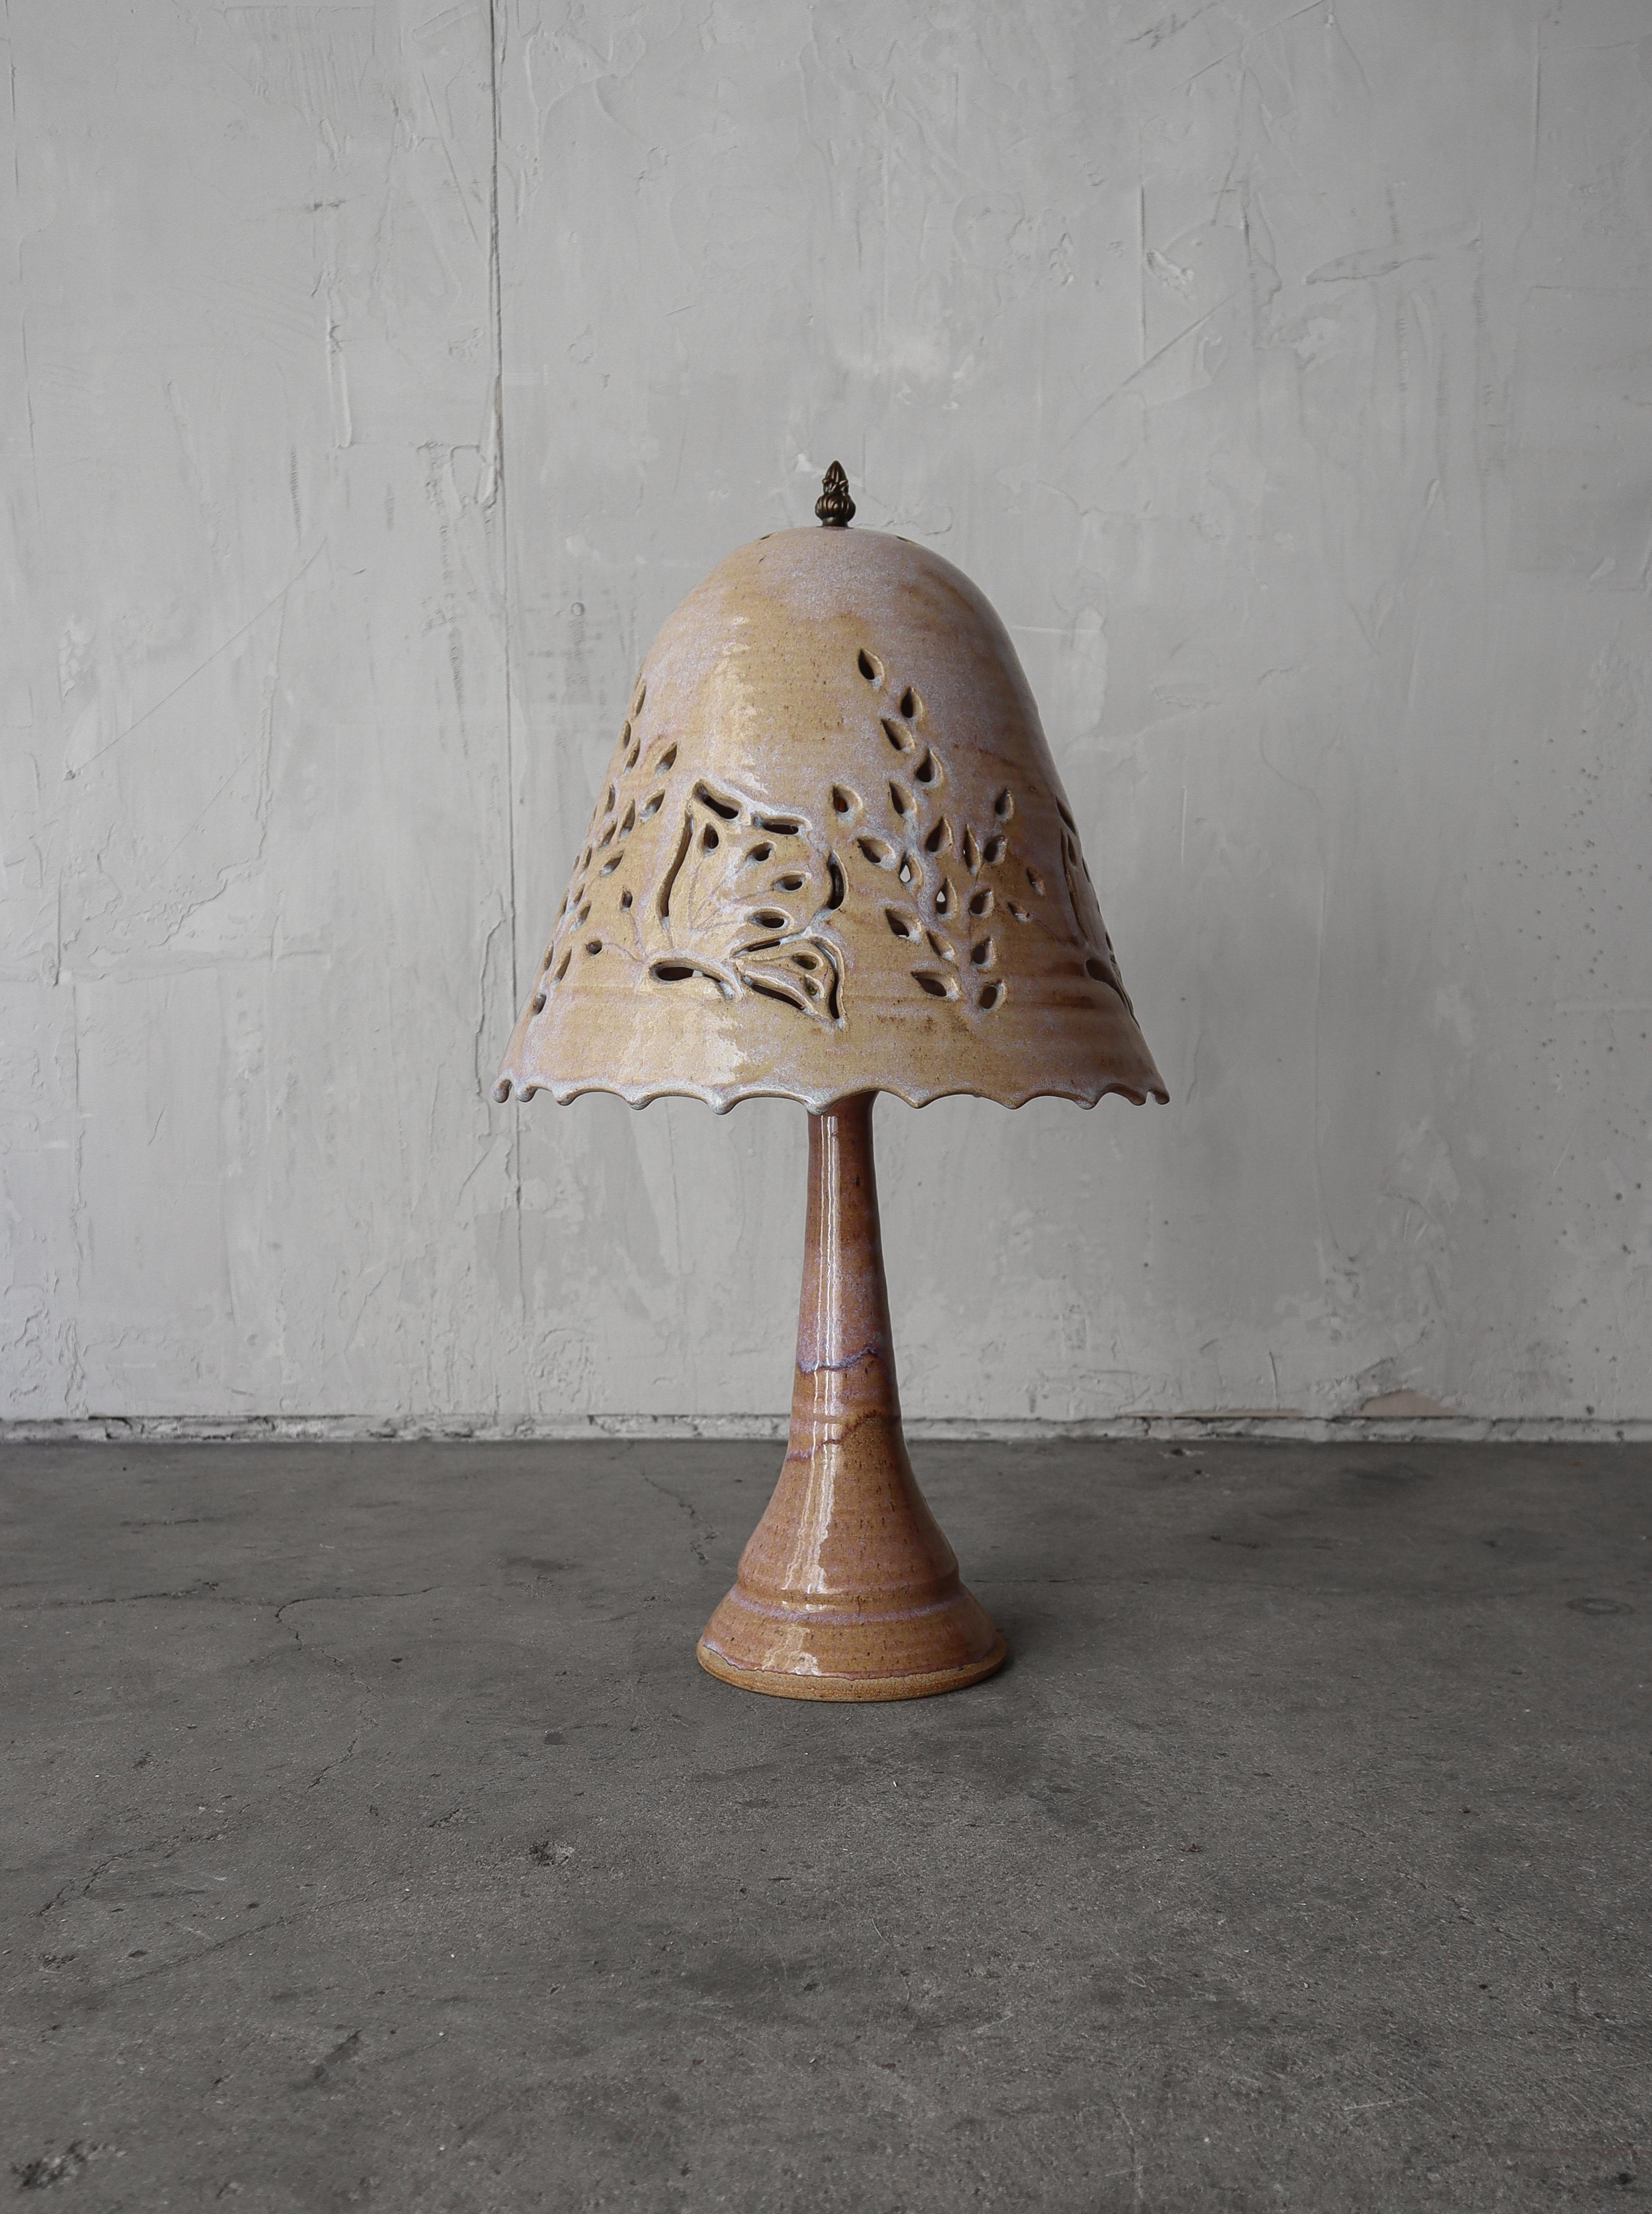 Magnificent hand crafted Studio Pottery table lamp.  Lamp base and shade are all glazed stoneware.  The lamp features a pierced shade that allows the lamp to cast the most beautiful light and shadows.  Such a warm beautiful piece.

Lamp is in